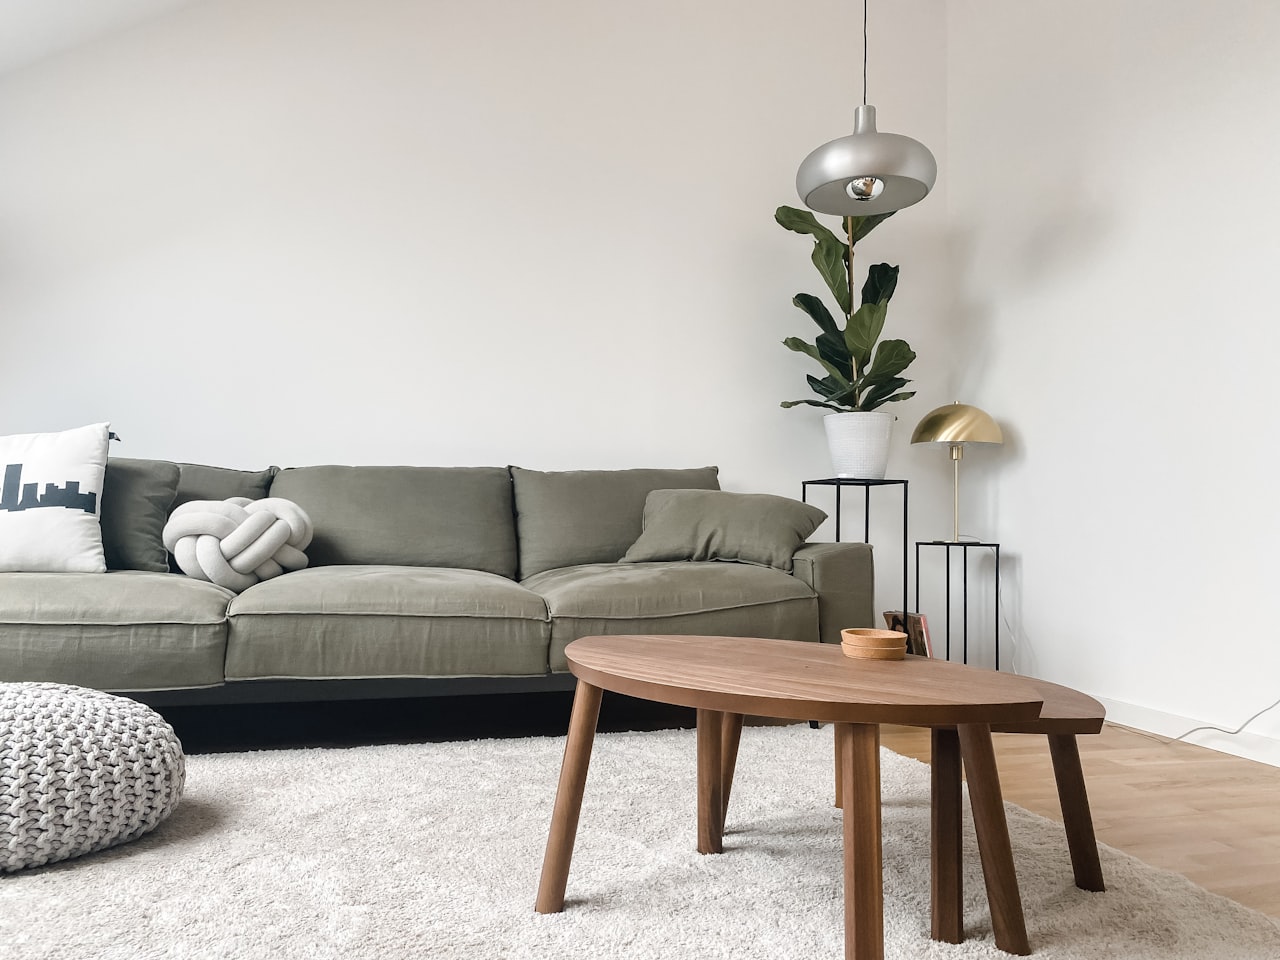 5 Things To Consider When Buying a Sofa